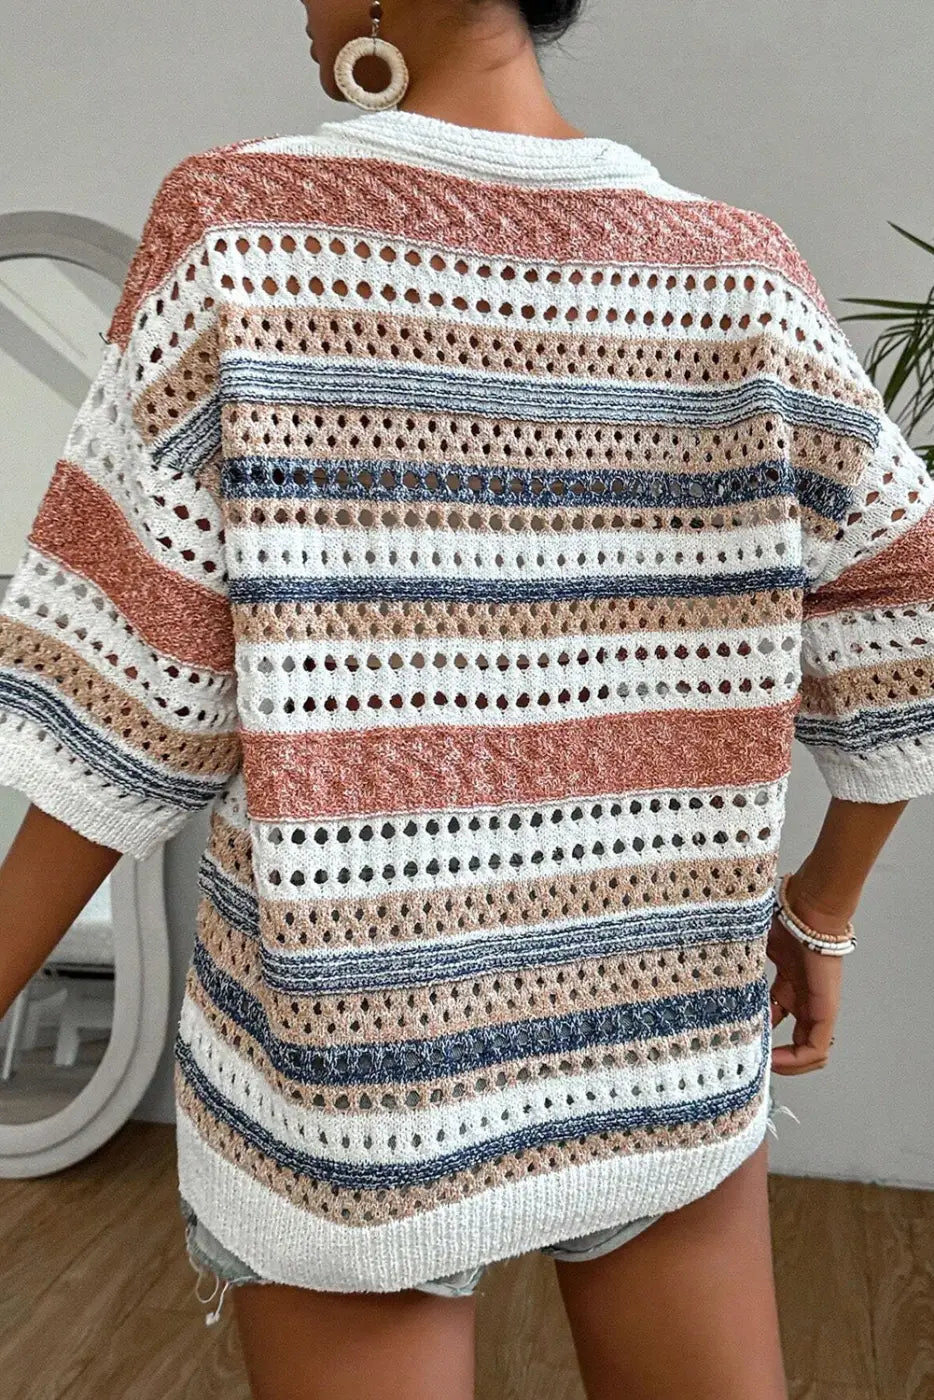 Palletpop knit sweater: relax relax in a striped crochet of white, pink, blue, and beige hues